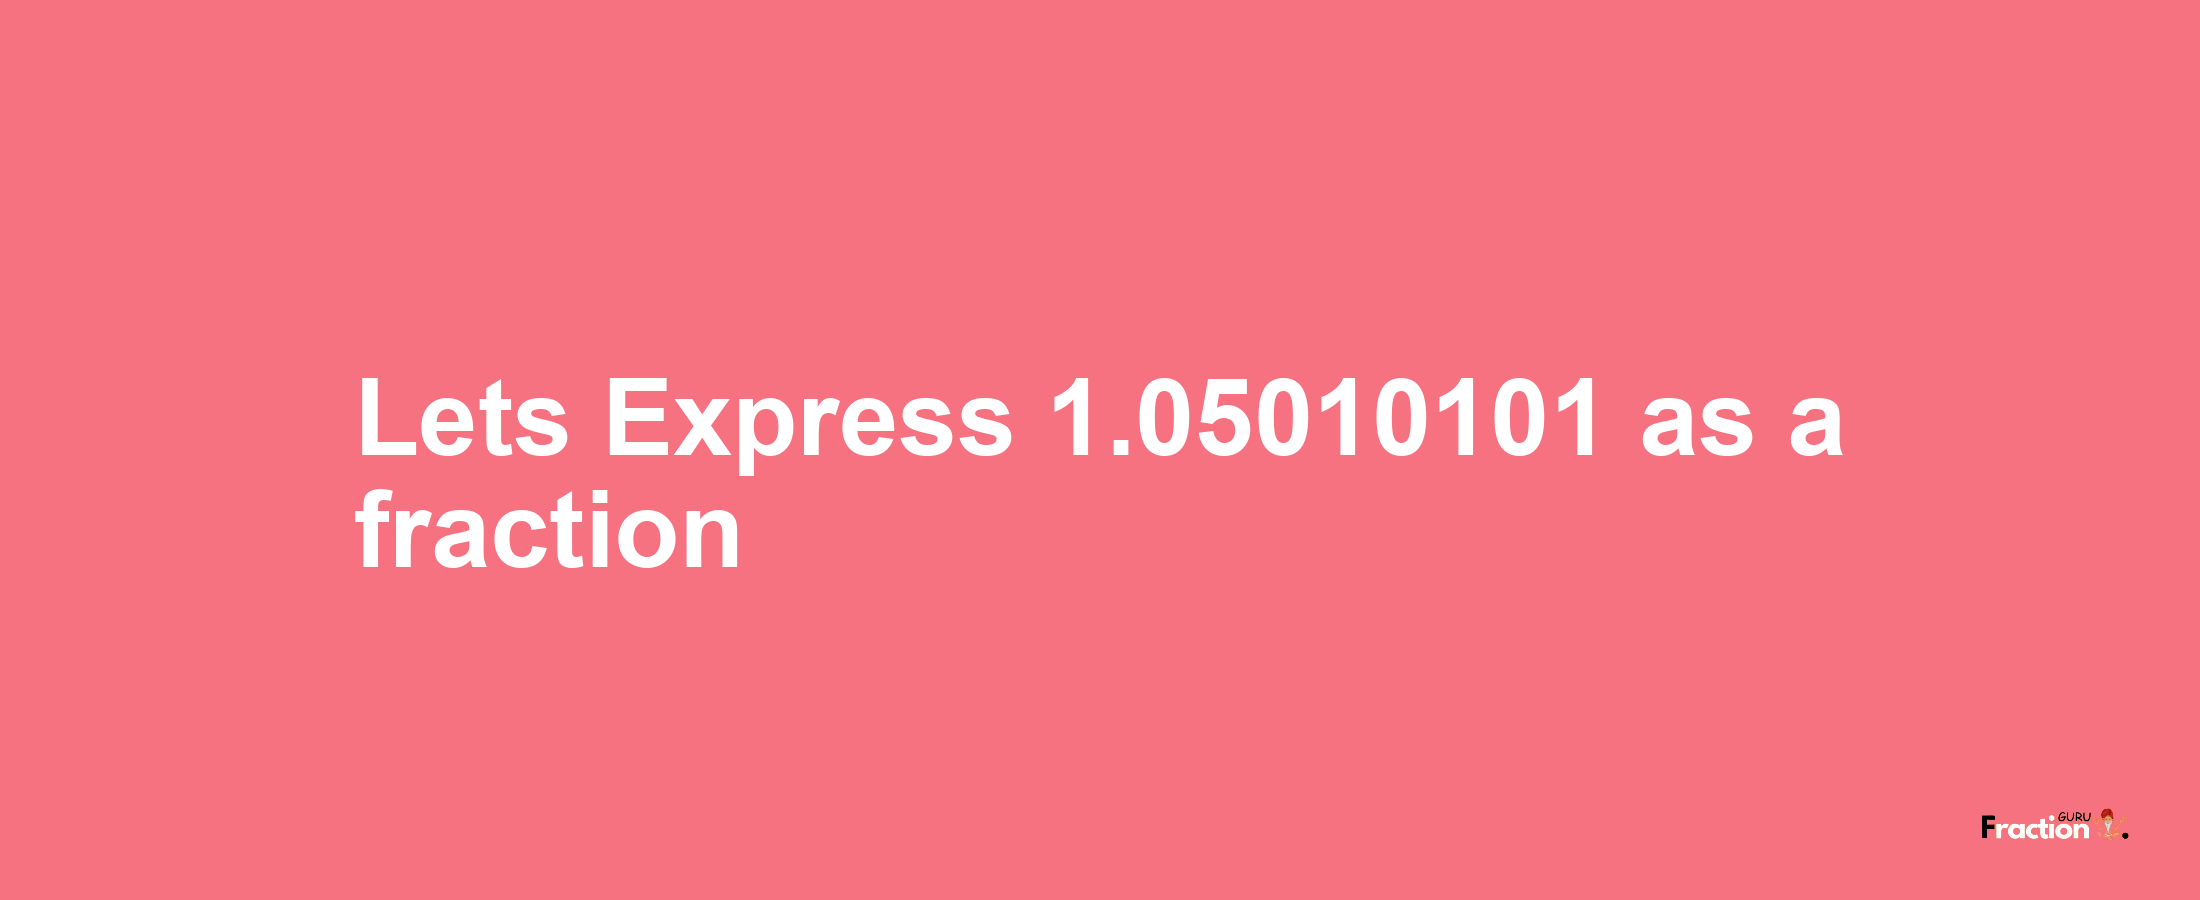 Lets Express 1.05010101 as afraction